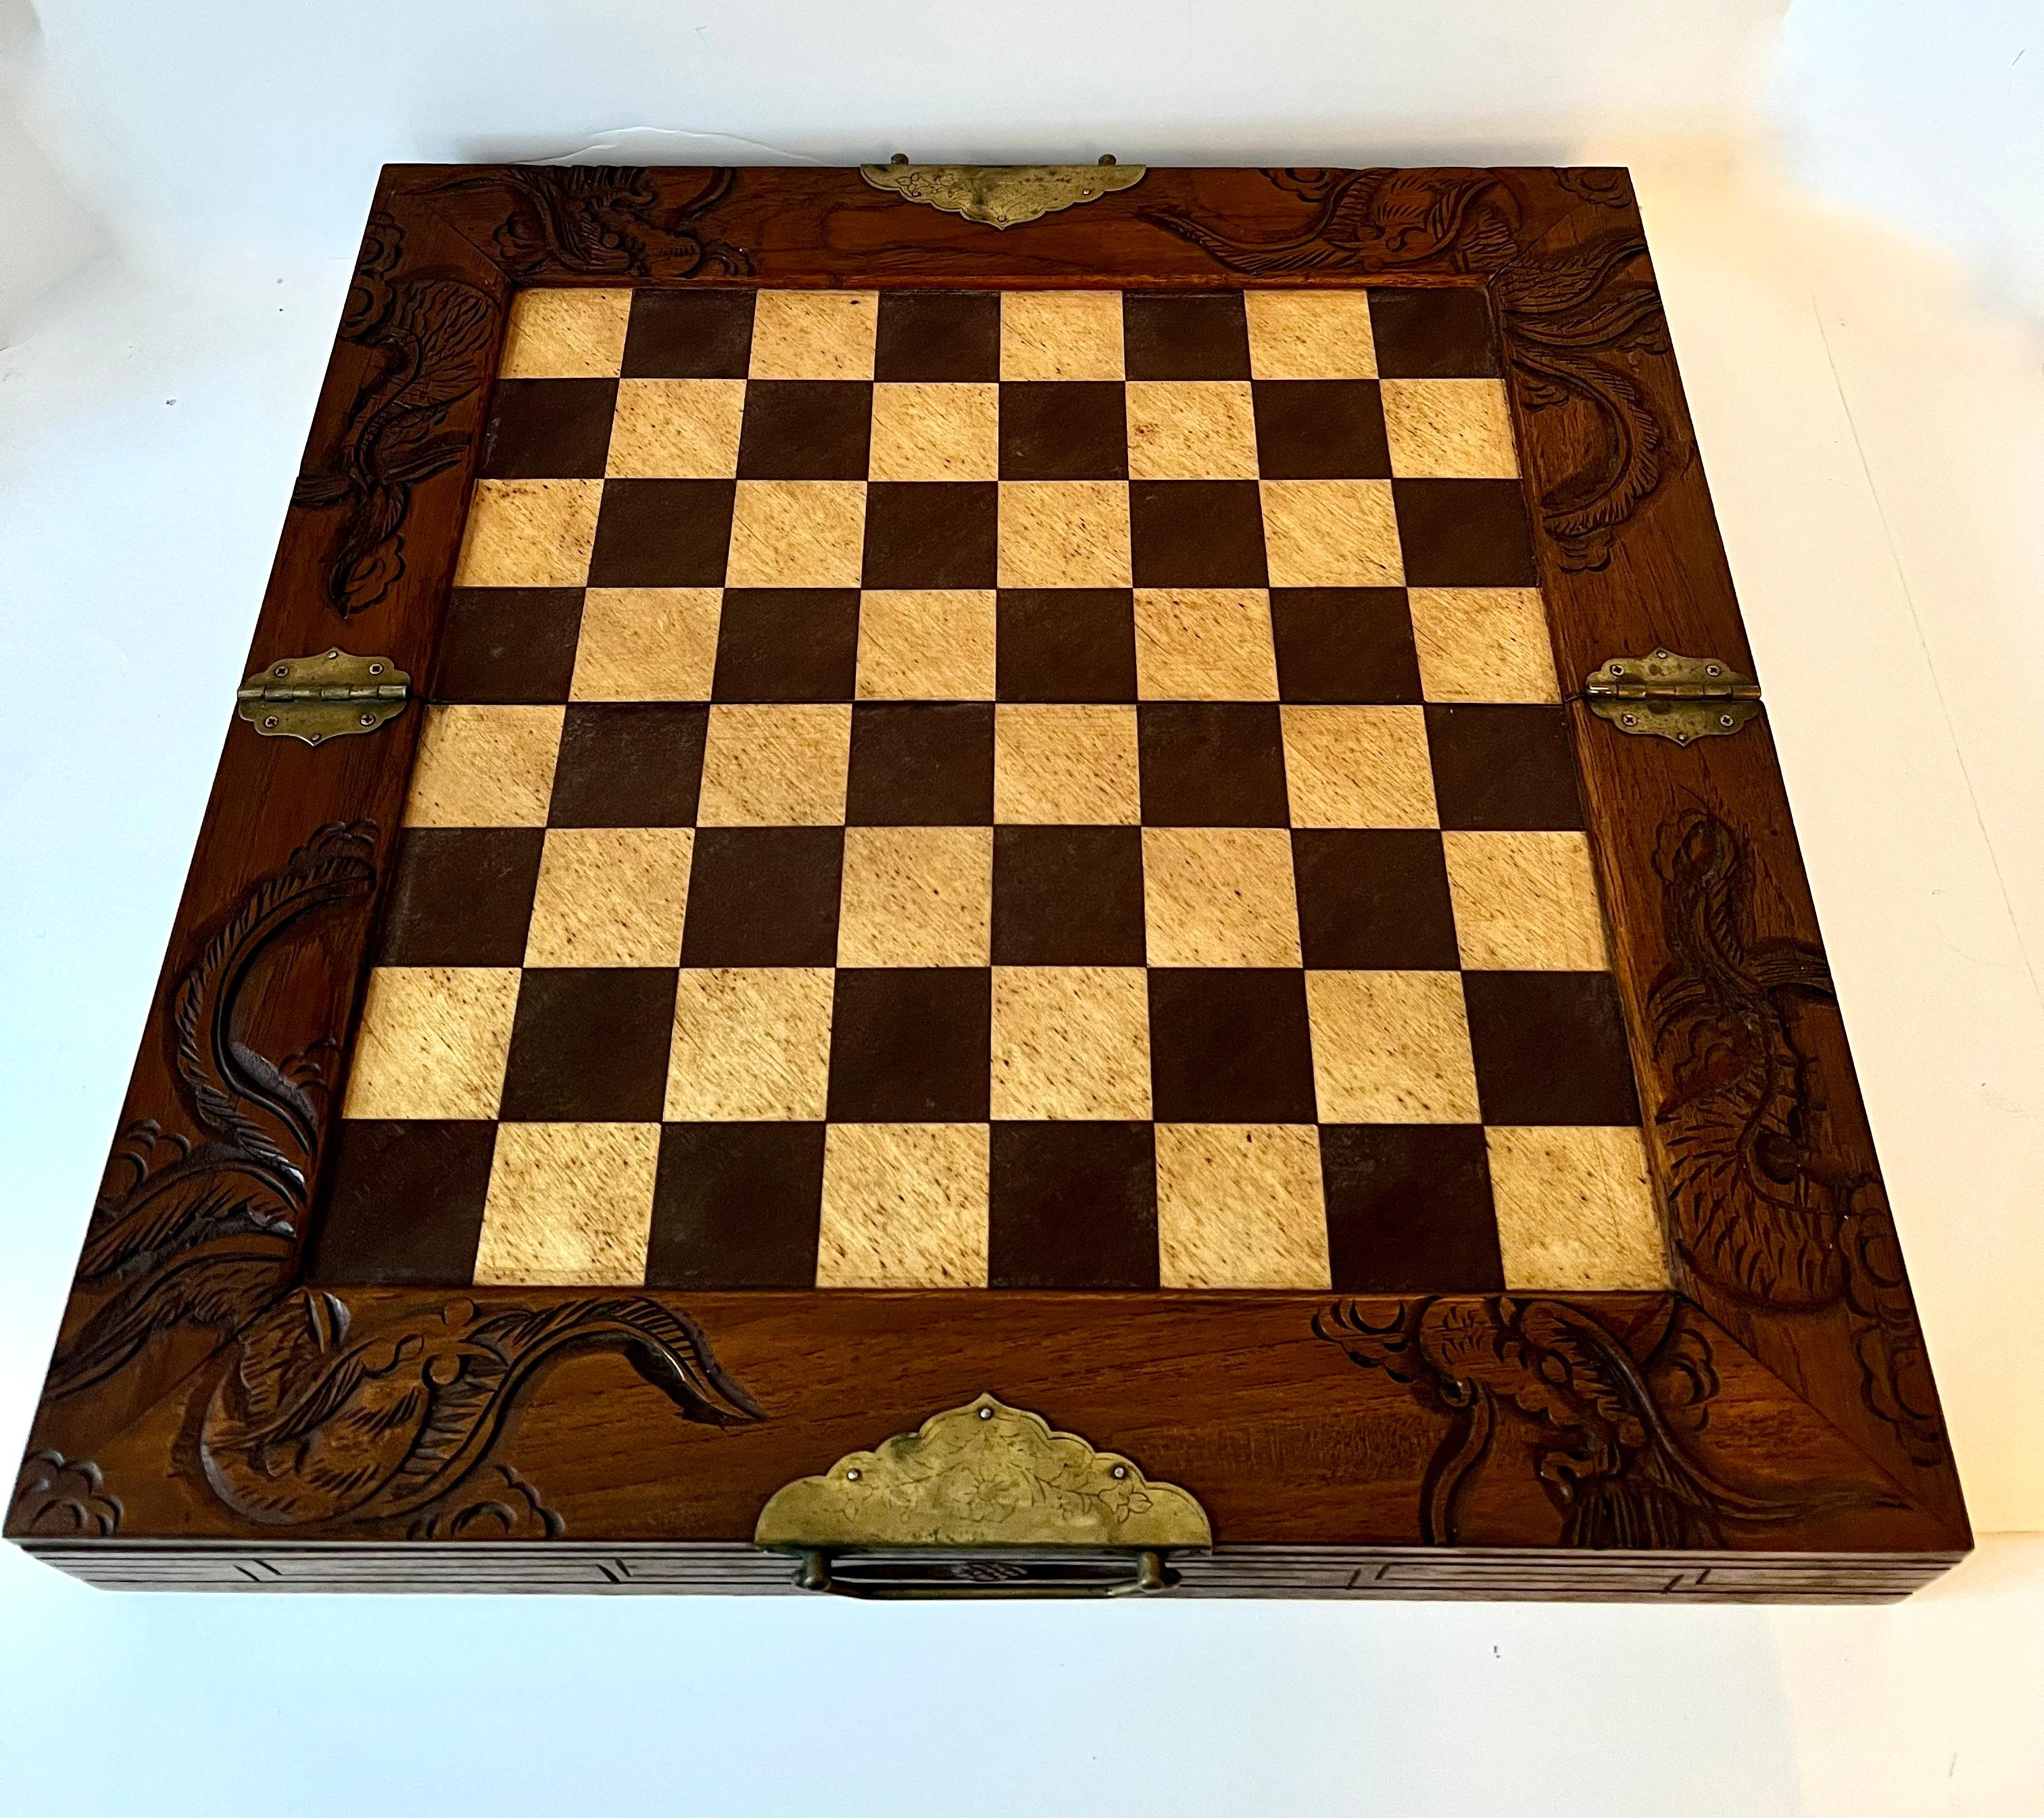 A beautifully Chess Board (could be used for checkers, not included) carved with Dragons around the perimeter. There are two drawers that hold each sides chess pieces. The board has a nice patination., Each drawer has a place to pull out and there